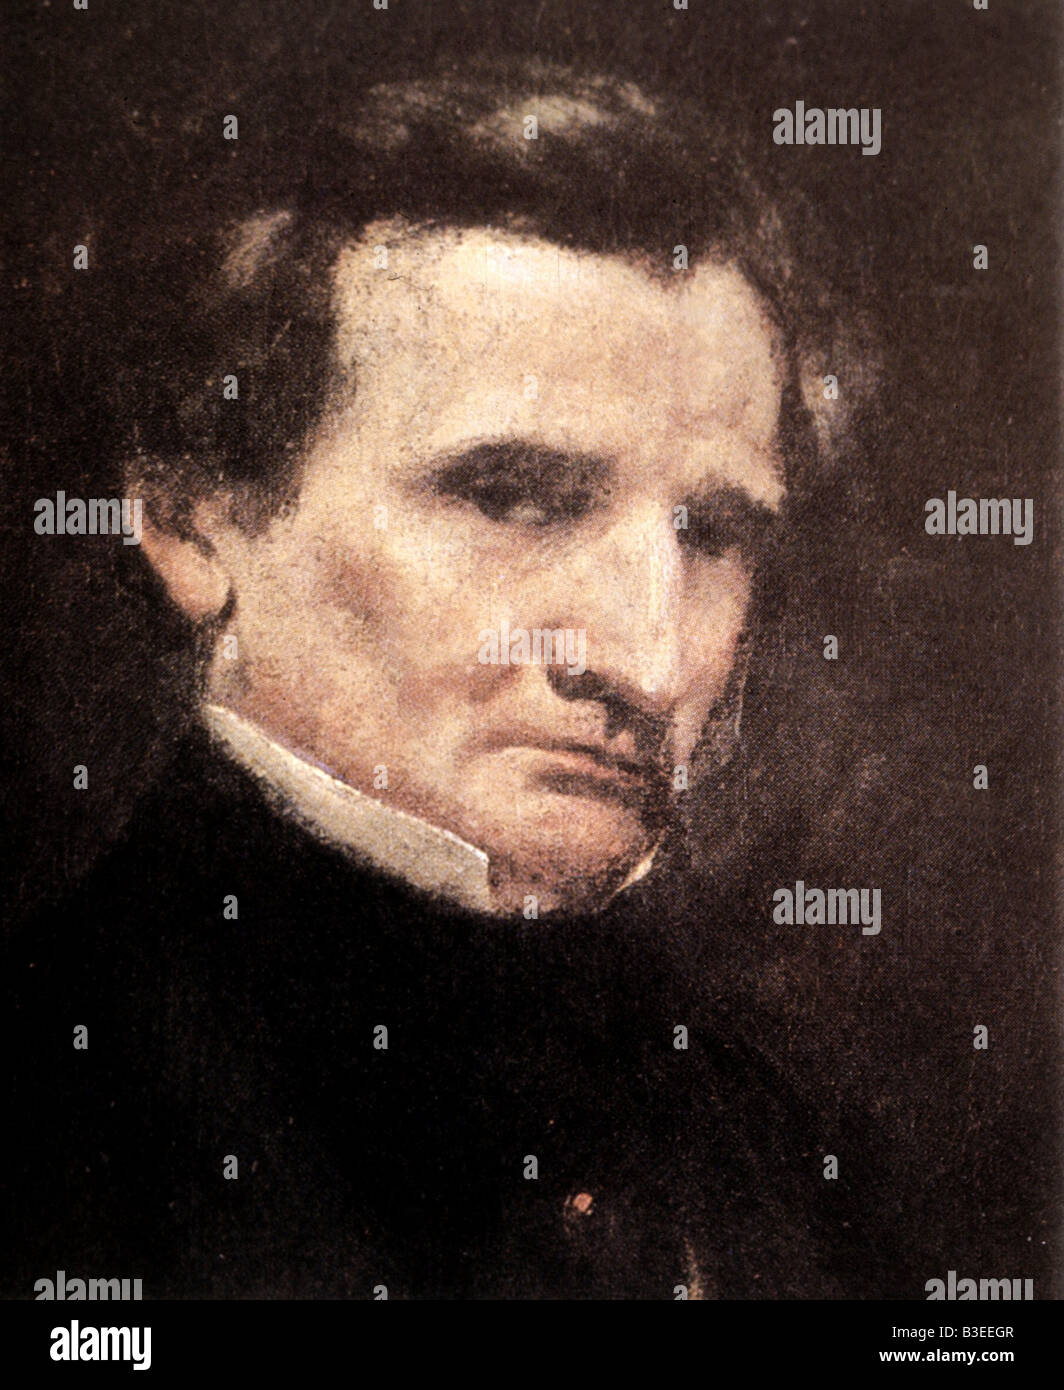 Berlioz, Hector Louis, 11.12.1803 - 8.3.1869, French Composer, portrait, painting, Stock Photo